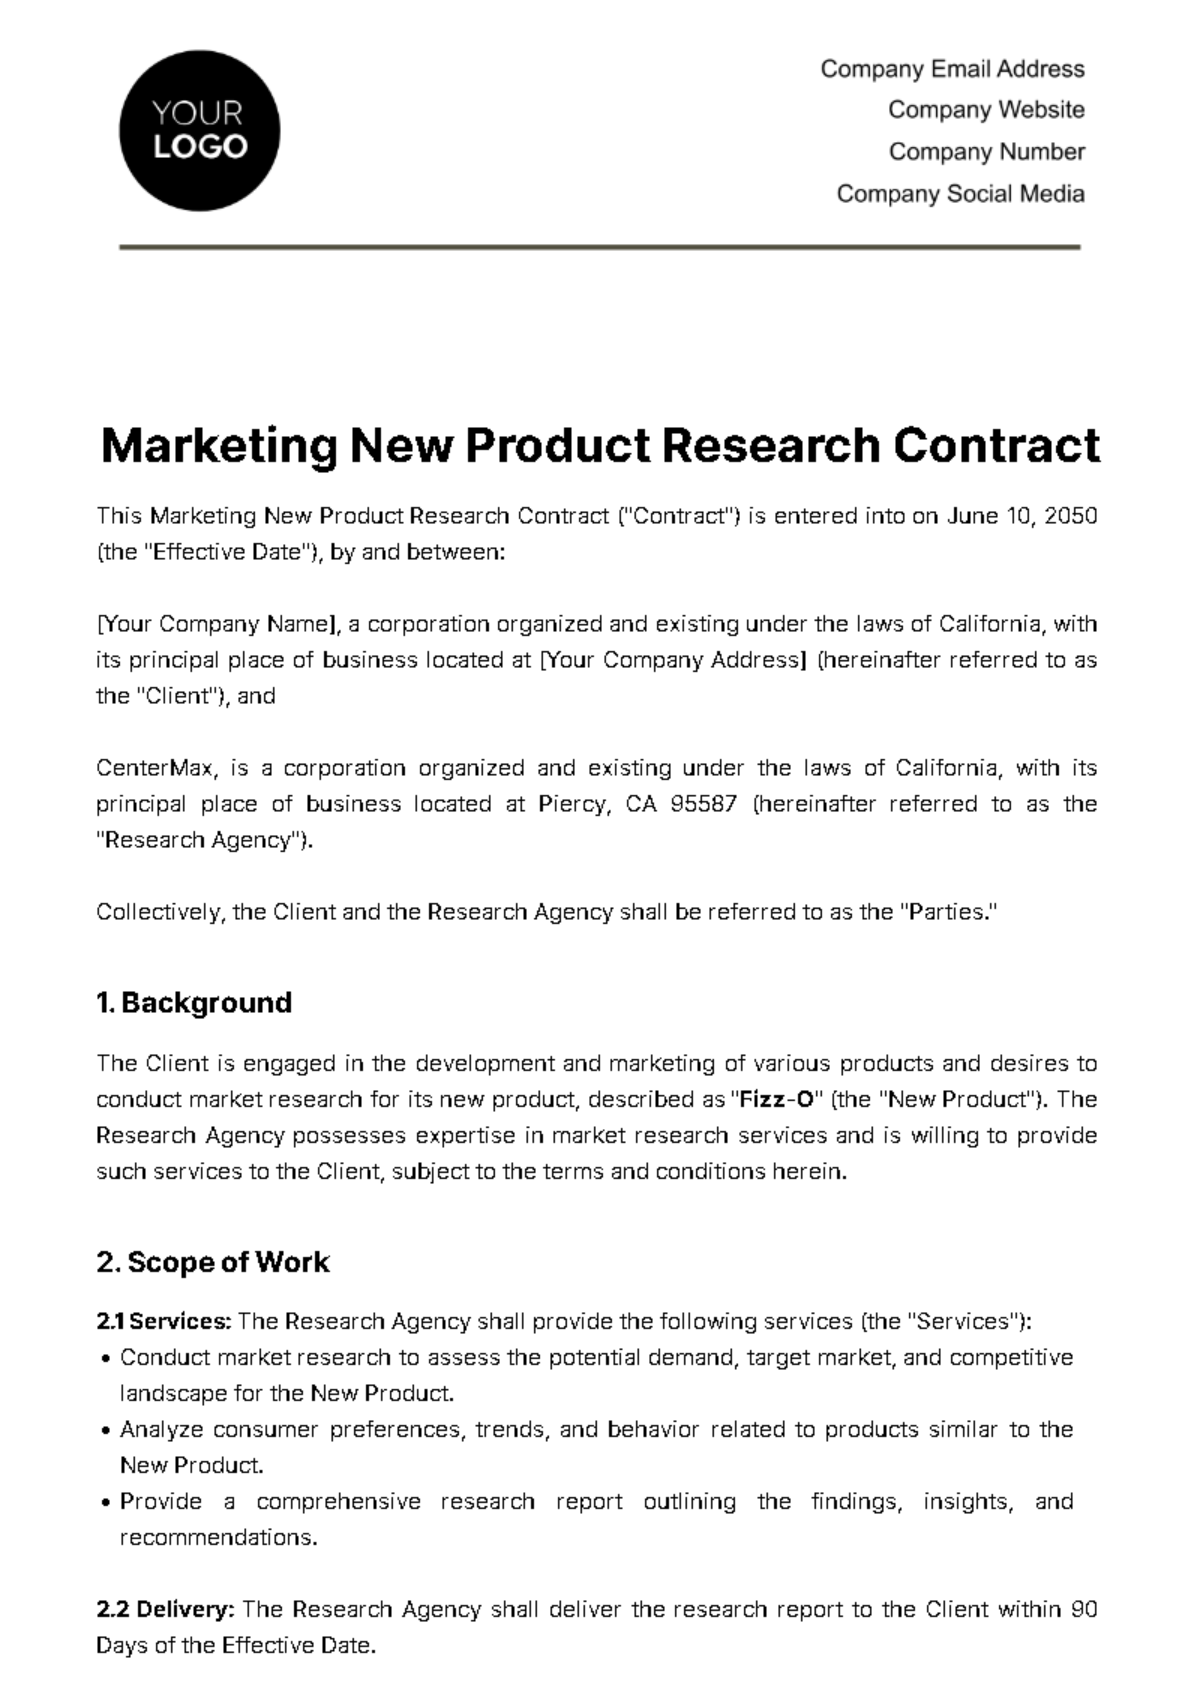 Free Marketing New Product Research Contract Template